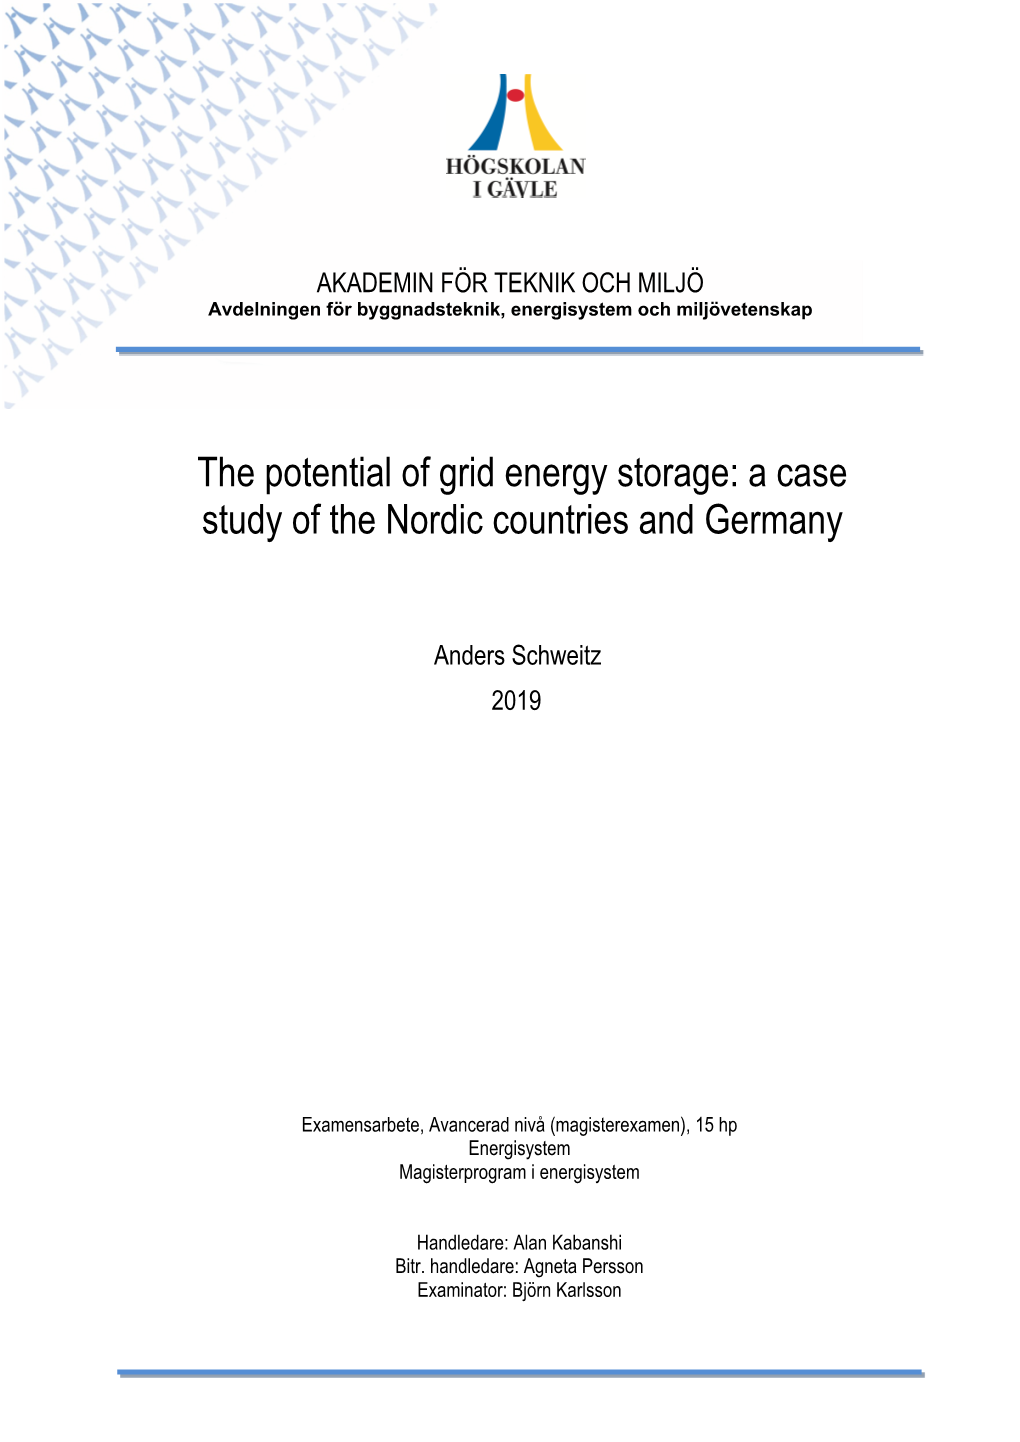 The Potential of Grid Energy Storage: a Case Study of the Nordic Countries and Germany